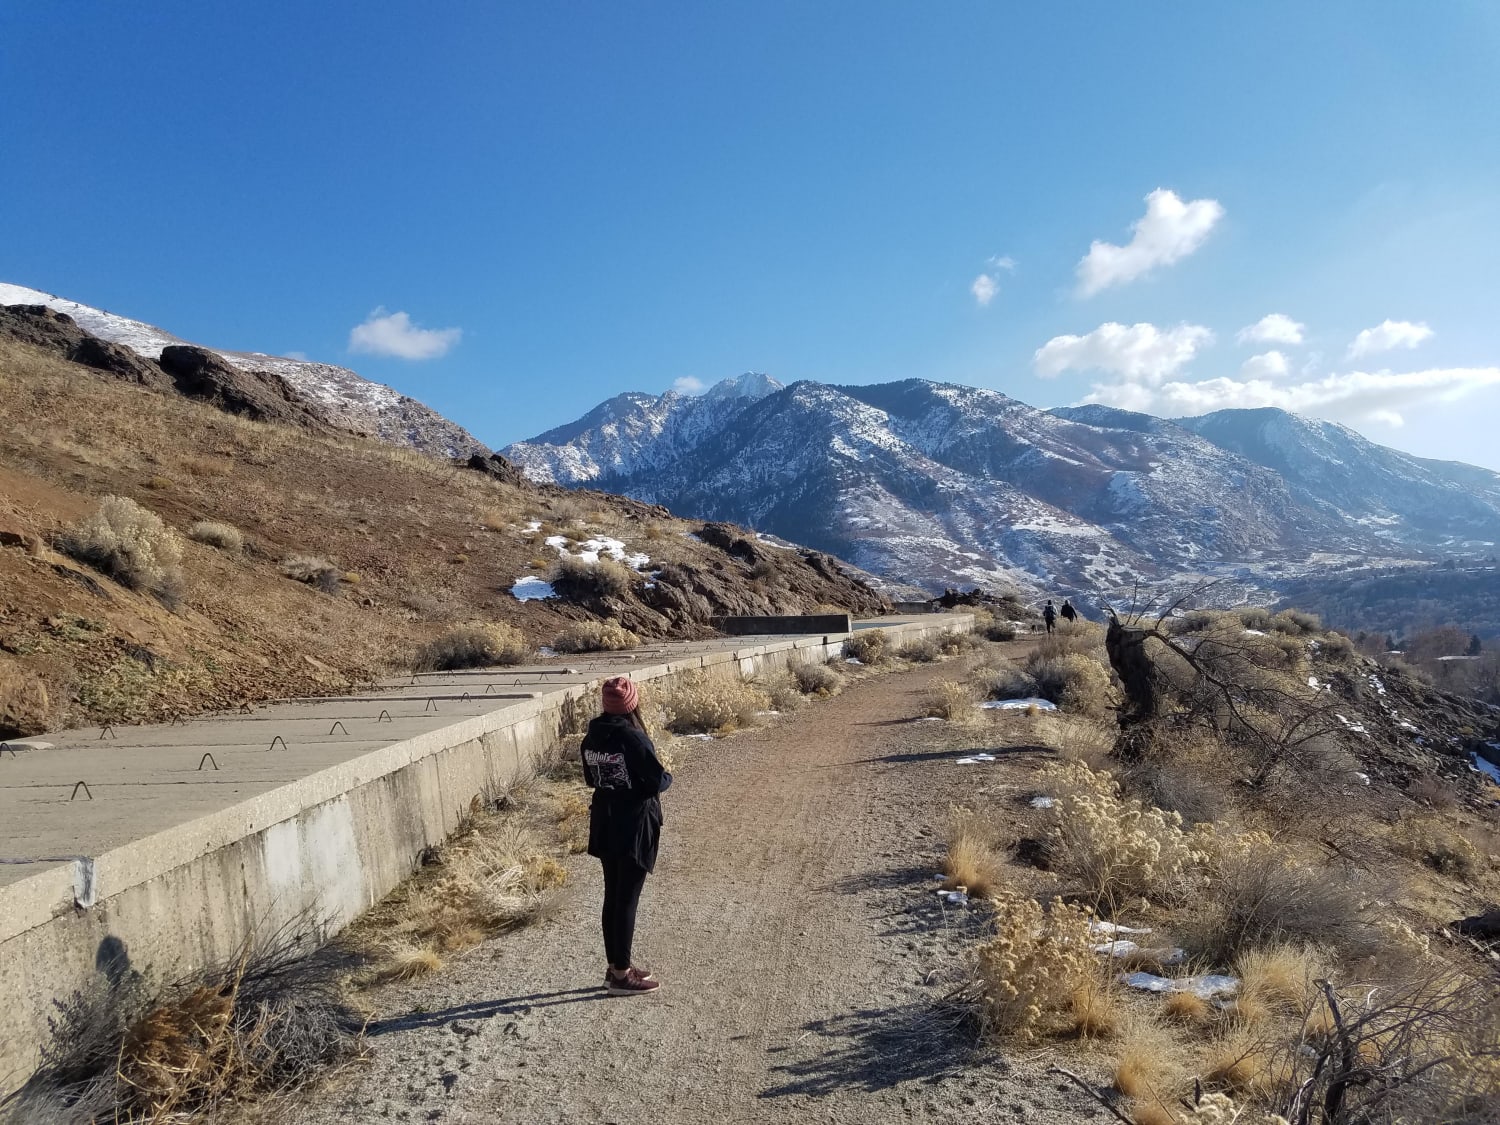 North Ogden UT. I can't believe neither me nor my friend had ever gone hiking in the Winter, it's very beautiful to say the least.